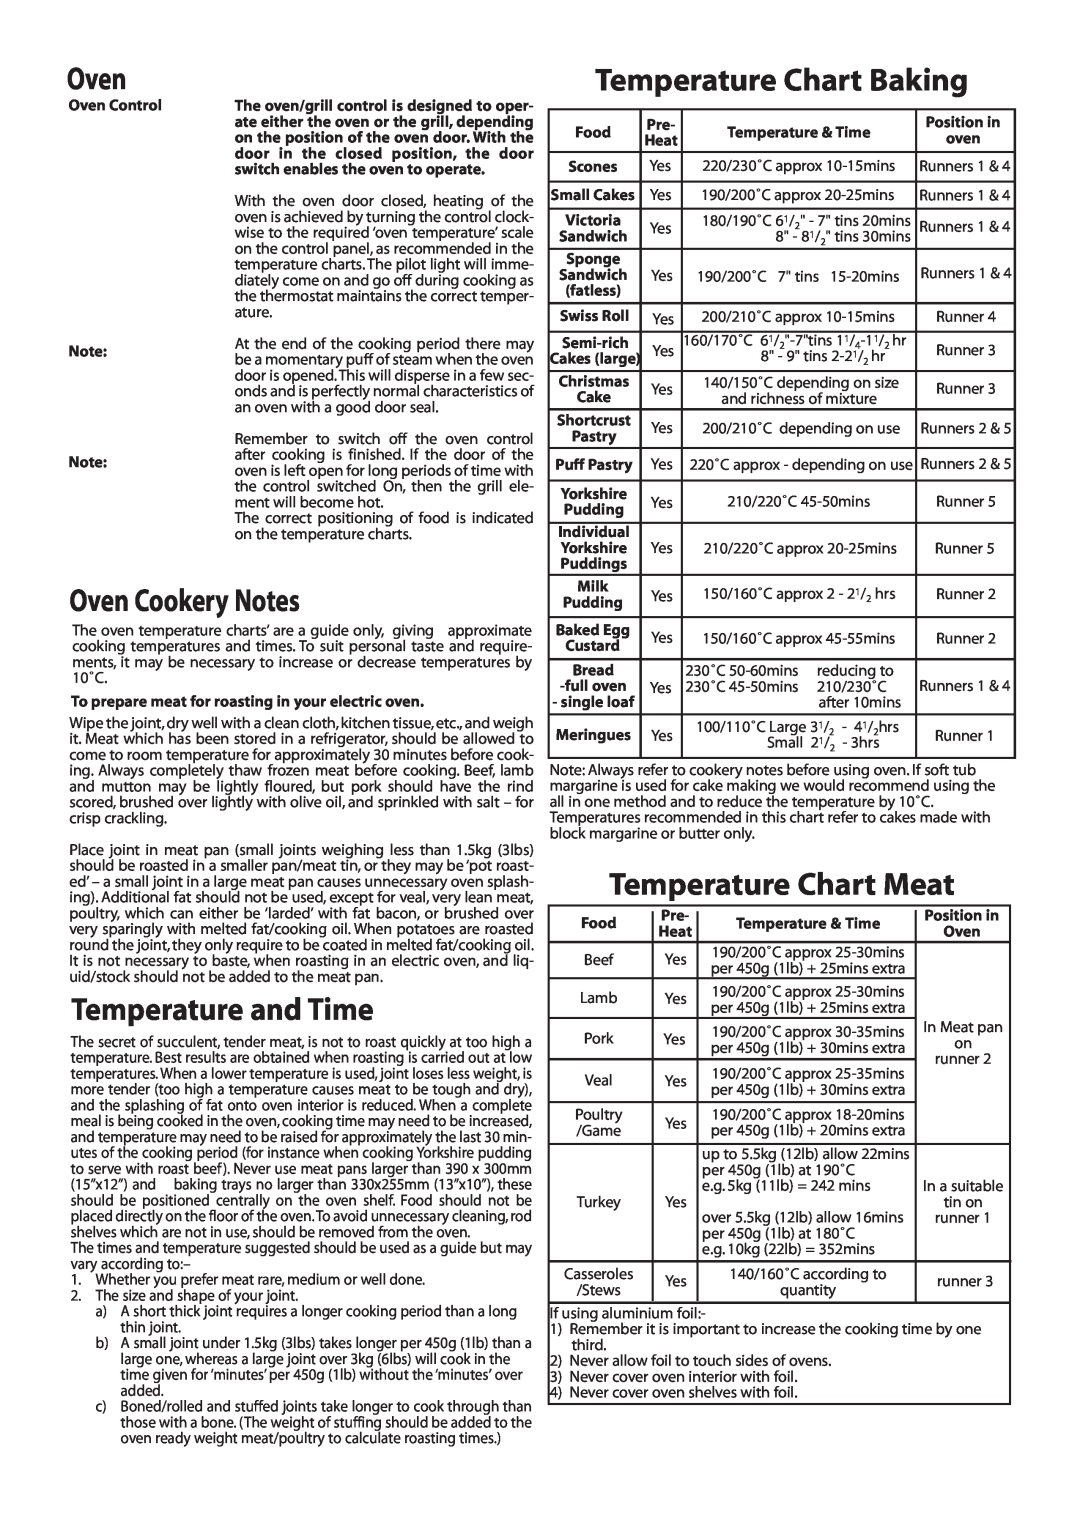 Hotpoint EW11E manual Temperature Chart Baking, Oven Cookery Notes, Temperature and Time, Temperature Chart Meat 